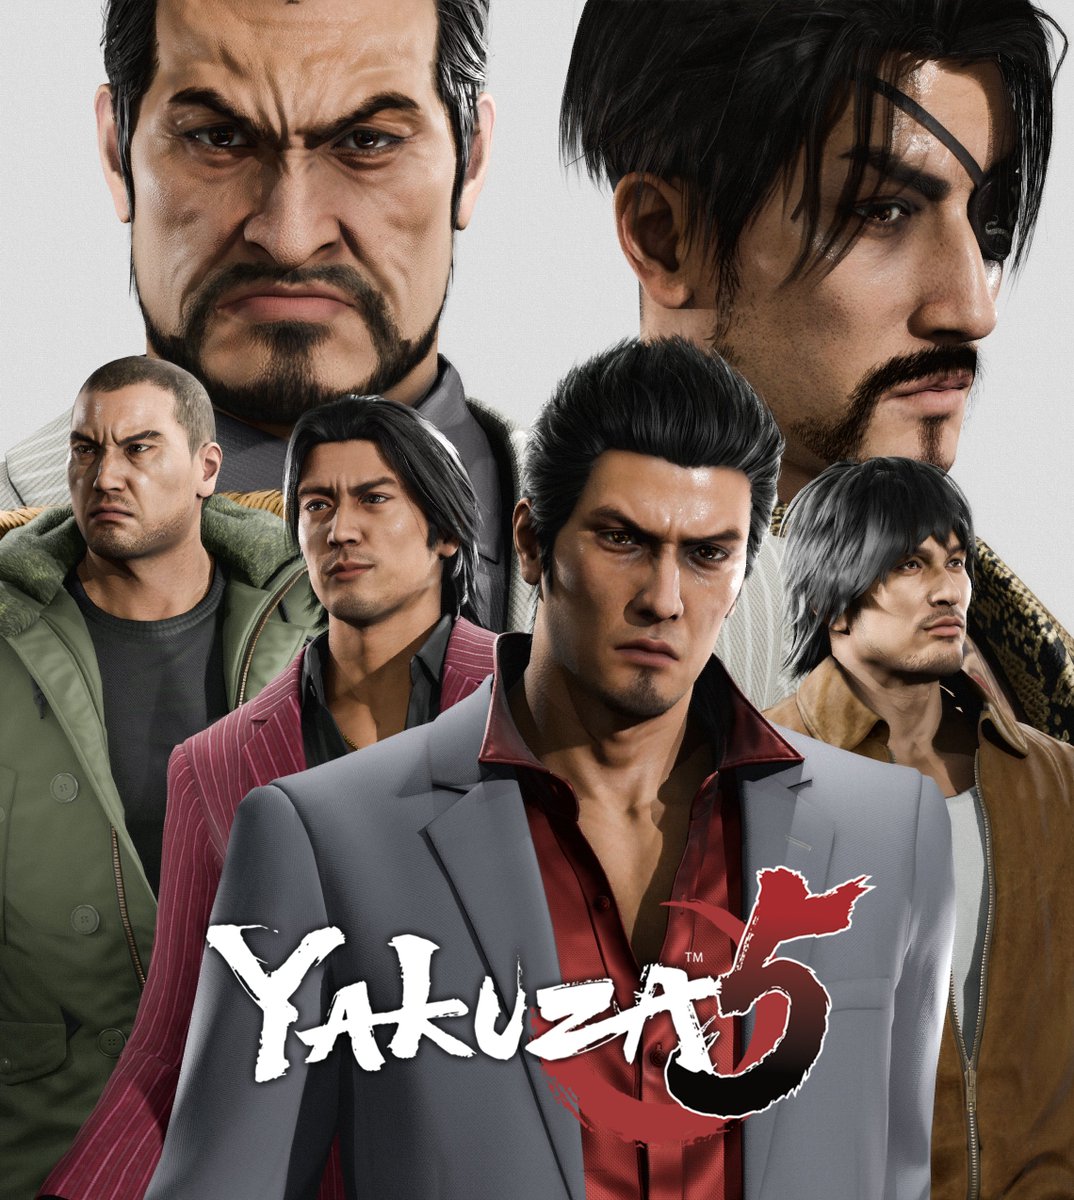 'shouldering each others dreams...
...that's kinda what friends are for, right?'
#Yakuza5 #Yakuza #LikeaDragon #龍が如く